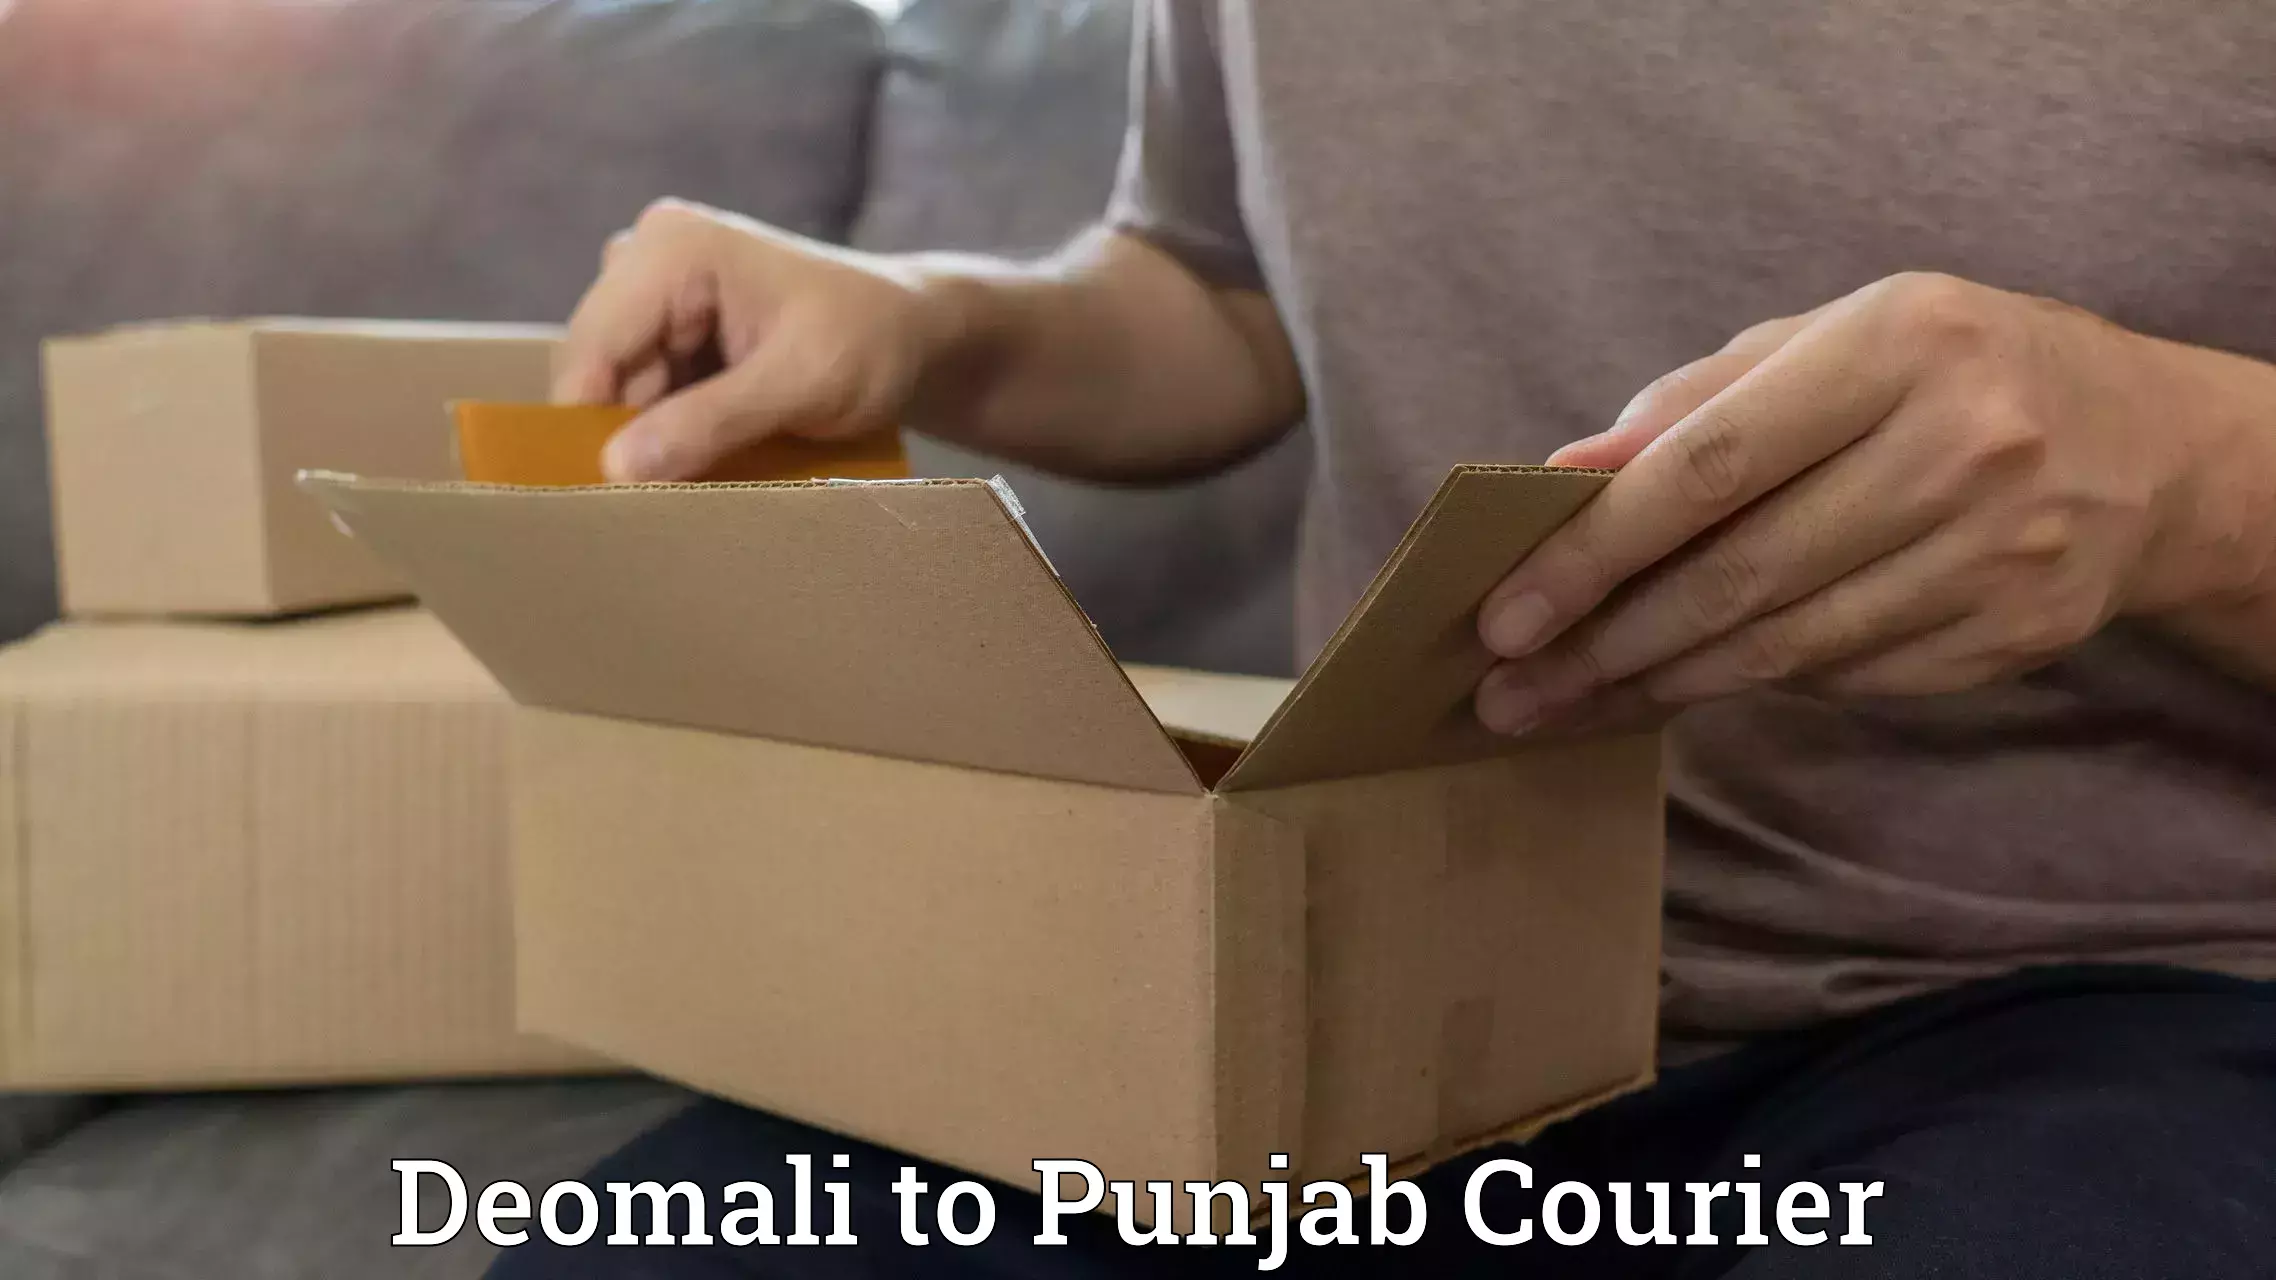 Affordable parcel service Deomali to Ludhiana